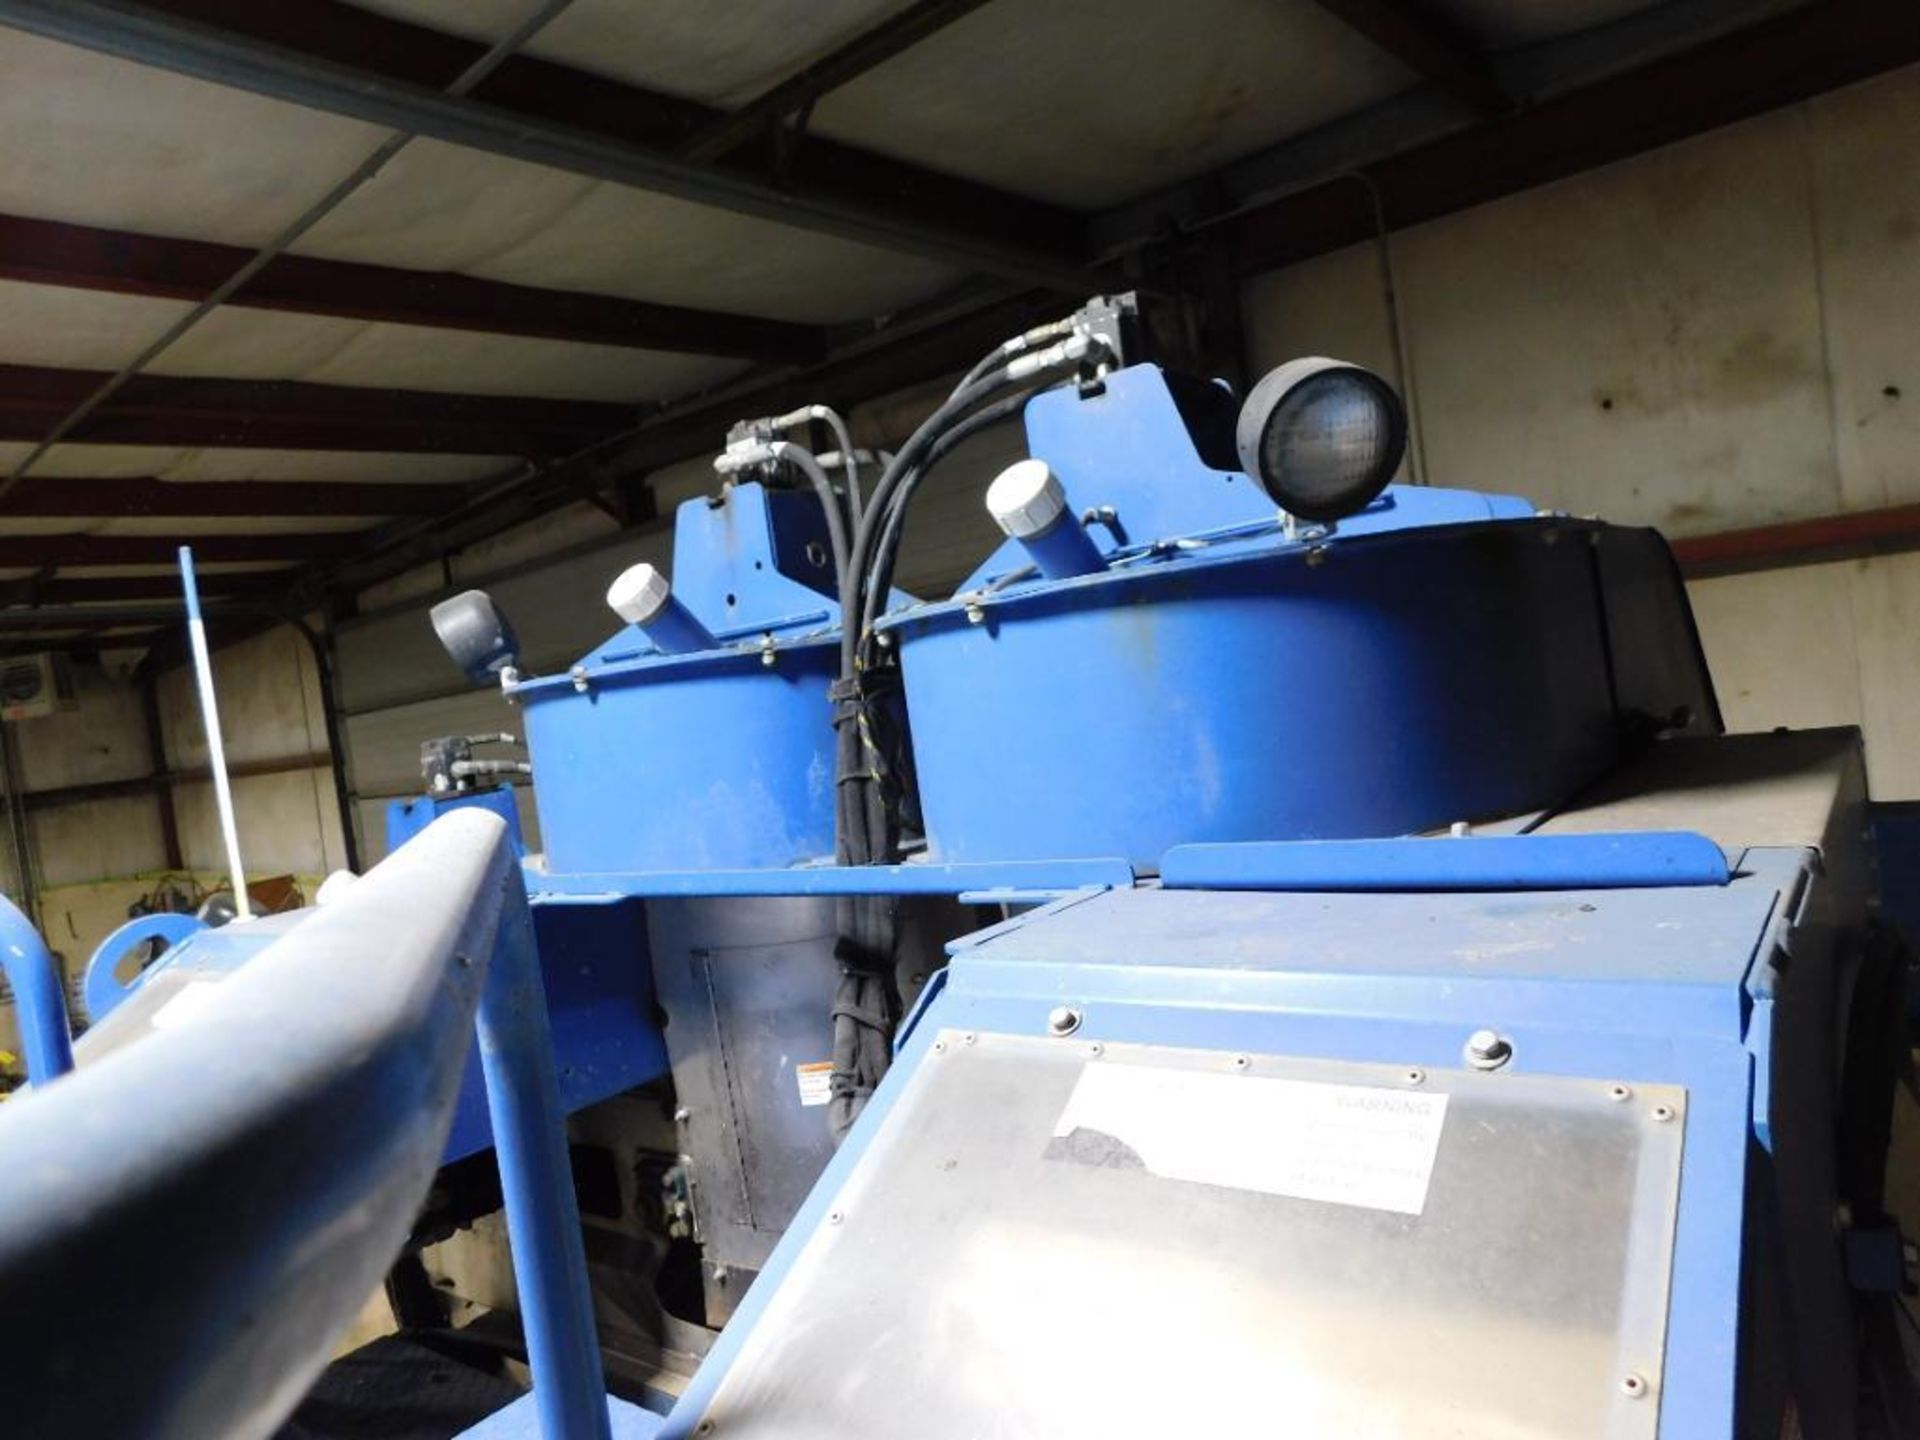 Oxbo 316XL Grape Harvester (LOCATED IN MAINTENANCE AREA) - Image 9 of 9